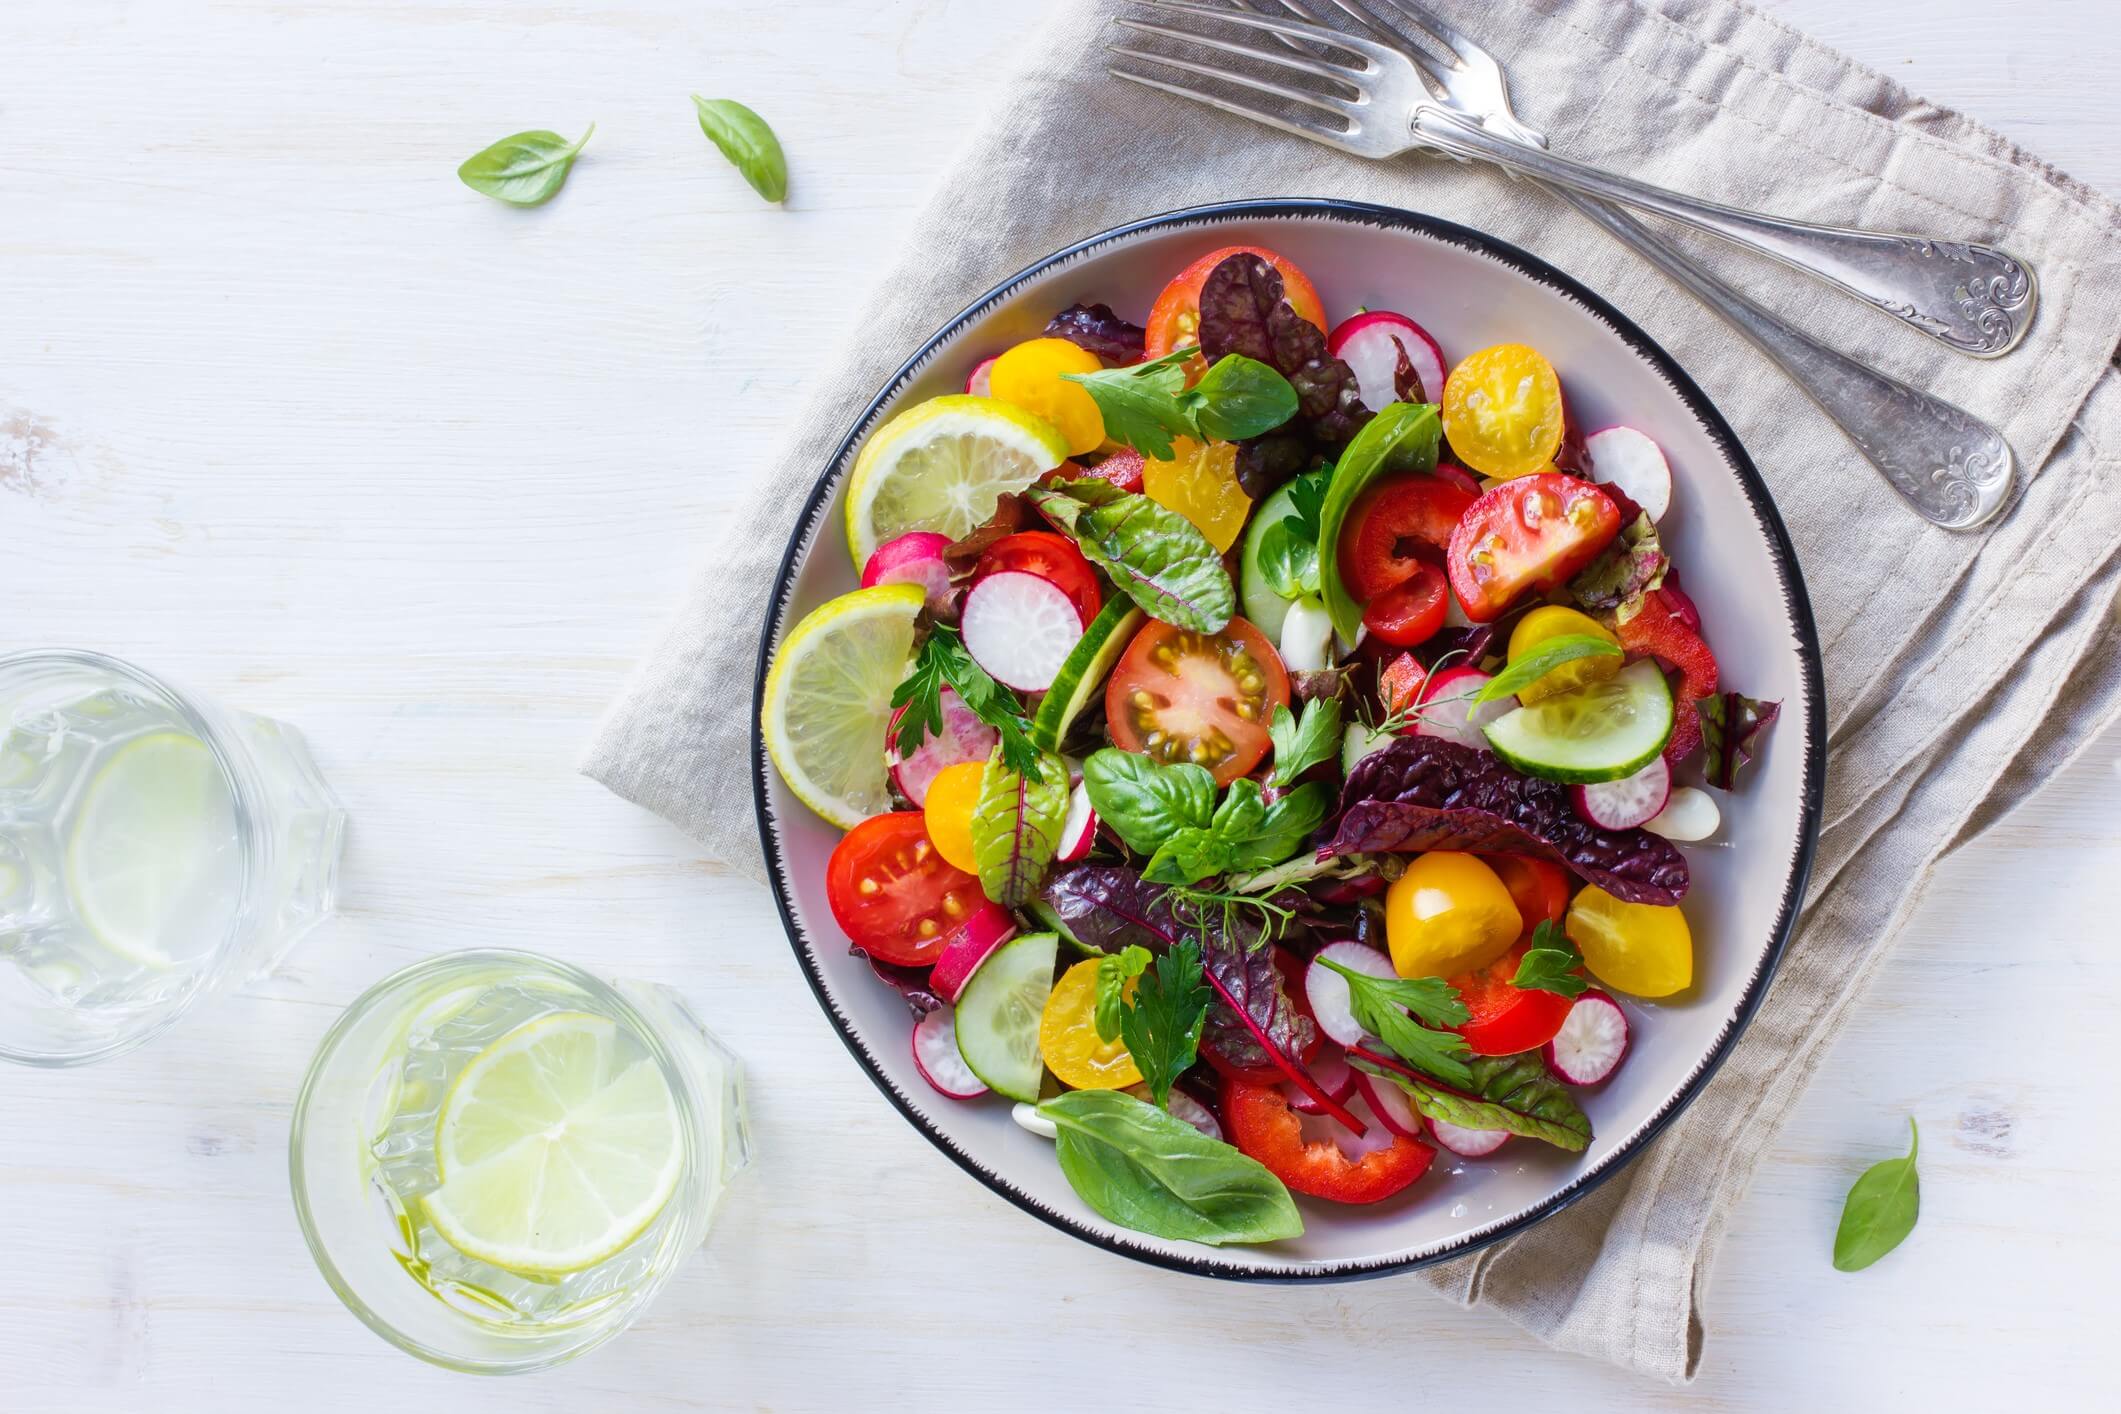 Salads are a great way to get creative with seasonal ingredients.